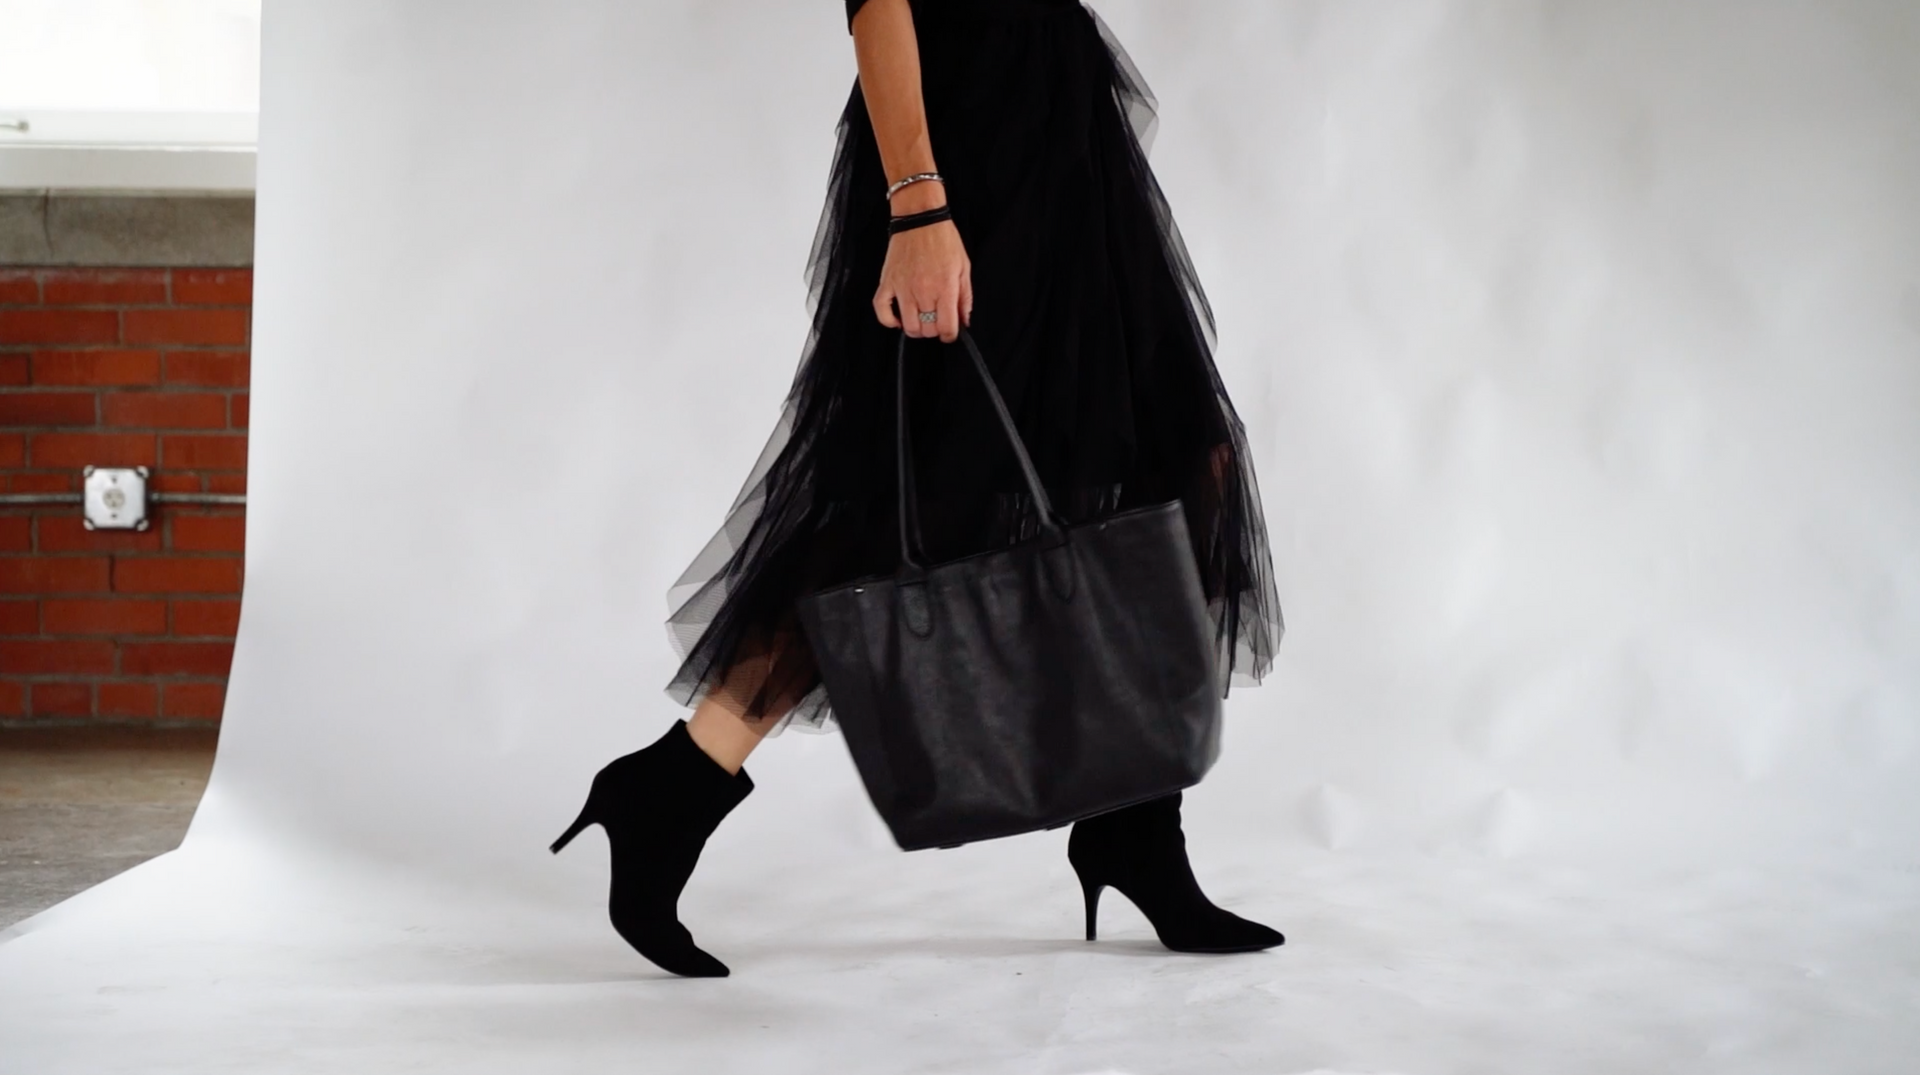 A woman in a black skirt is carrying a black tote bag.